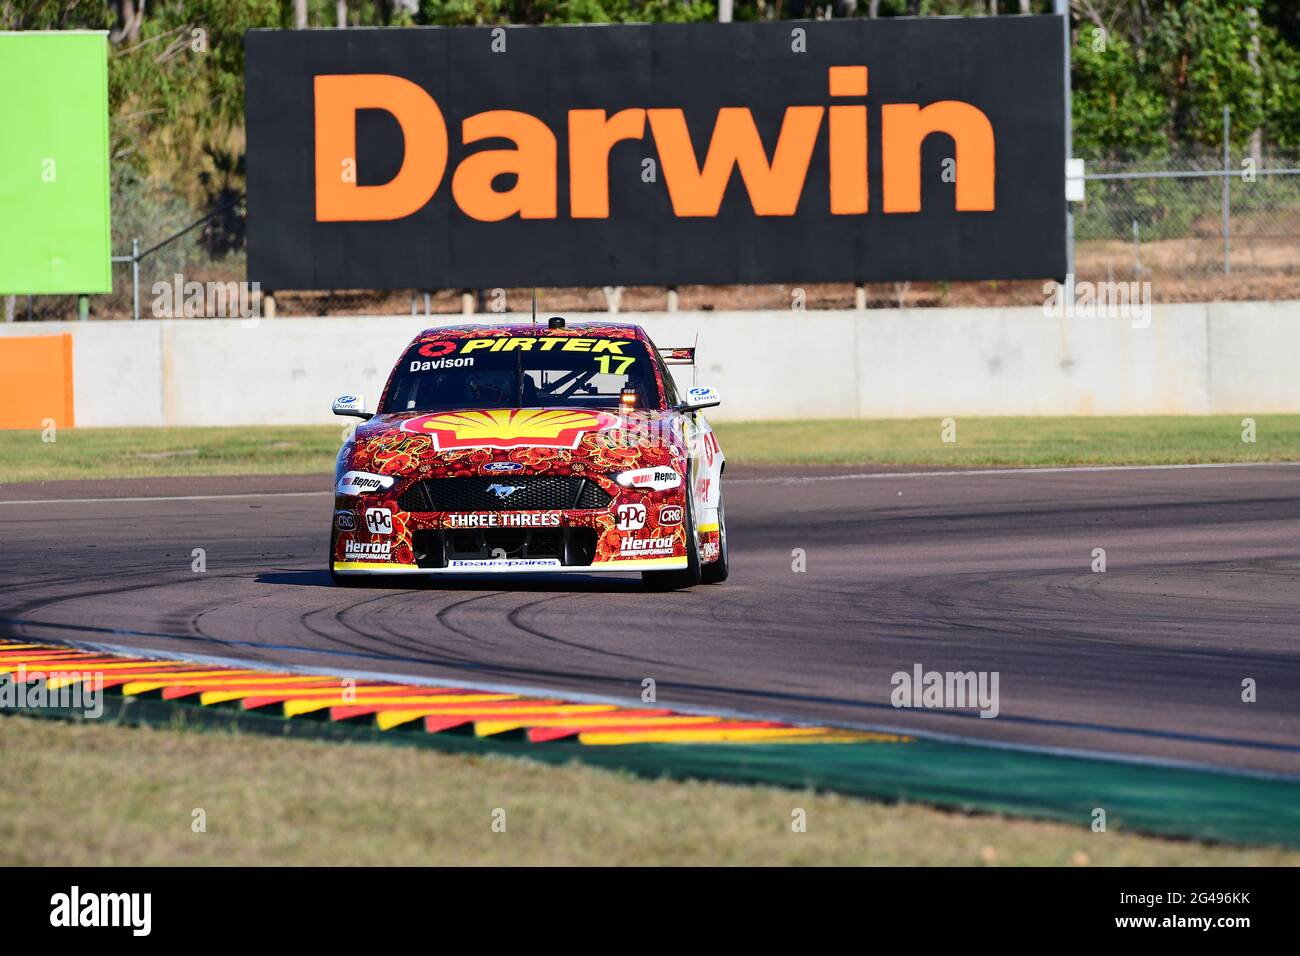 Hidden Valley. Darwin, Australia. 20 June, 2021.Pictured,  at the Australian Supercars Championship. Will Davison takes pole in qualifying for Race 14 in Qualifying 2 with a lap time of 1.04.95 in the Shell V-Power Racing Ford Mustang.  Credit: Karl Phillipson/Optikal/Alamy Live News Stock Photo